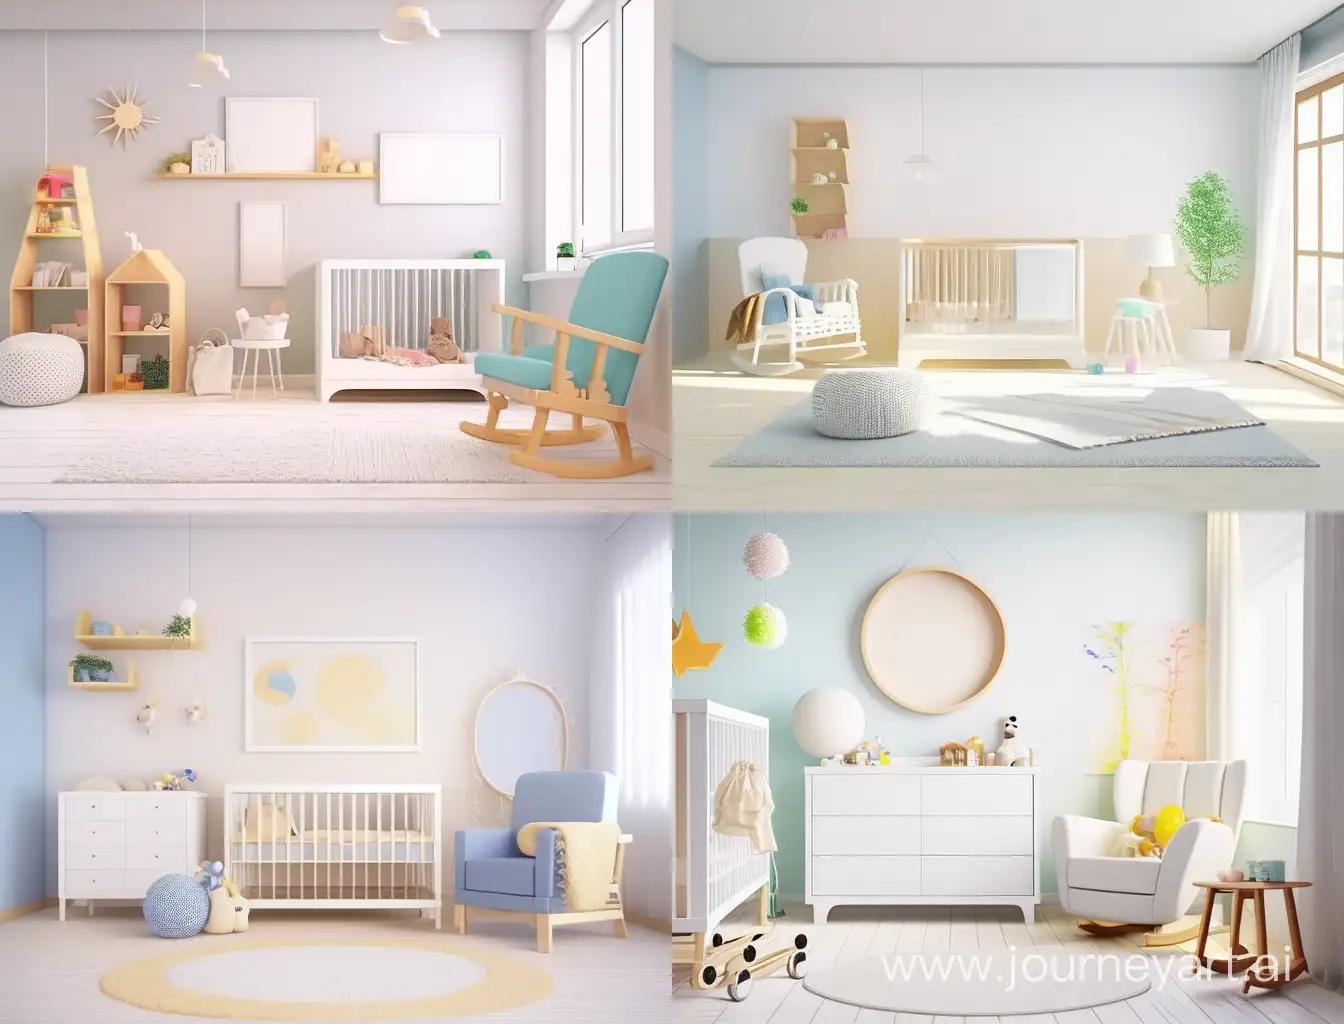 Create a big frame mockup for a product in a clean, bright, and modern baby room. Use light colors to create a bright and airy feel. Position the frame as the focal point of the room.